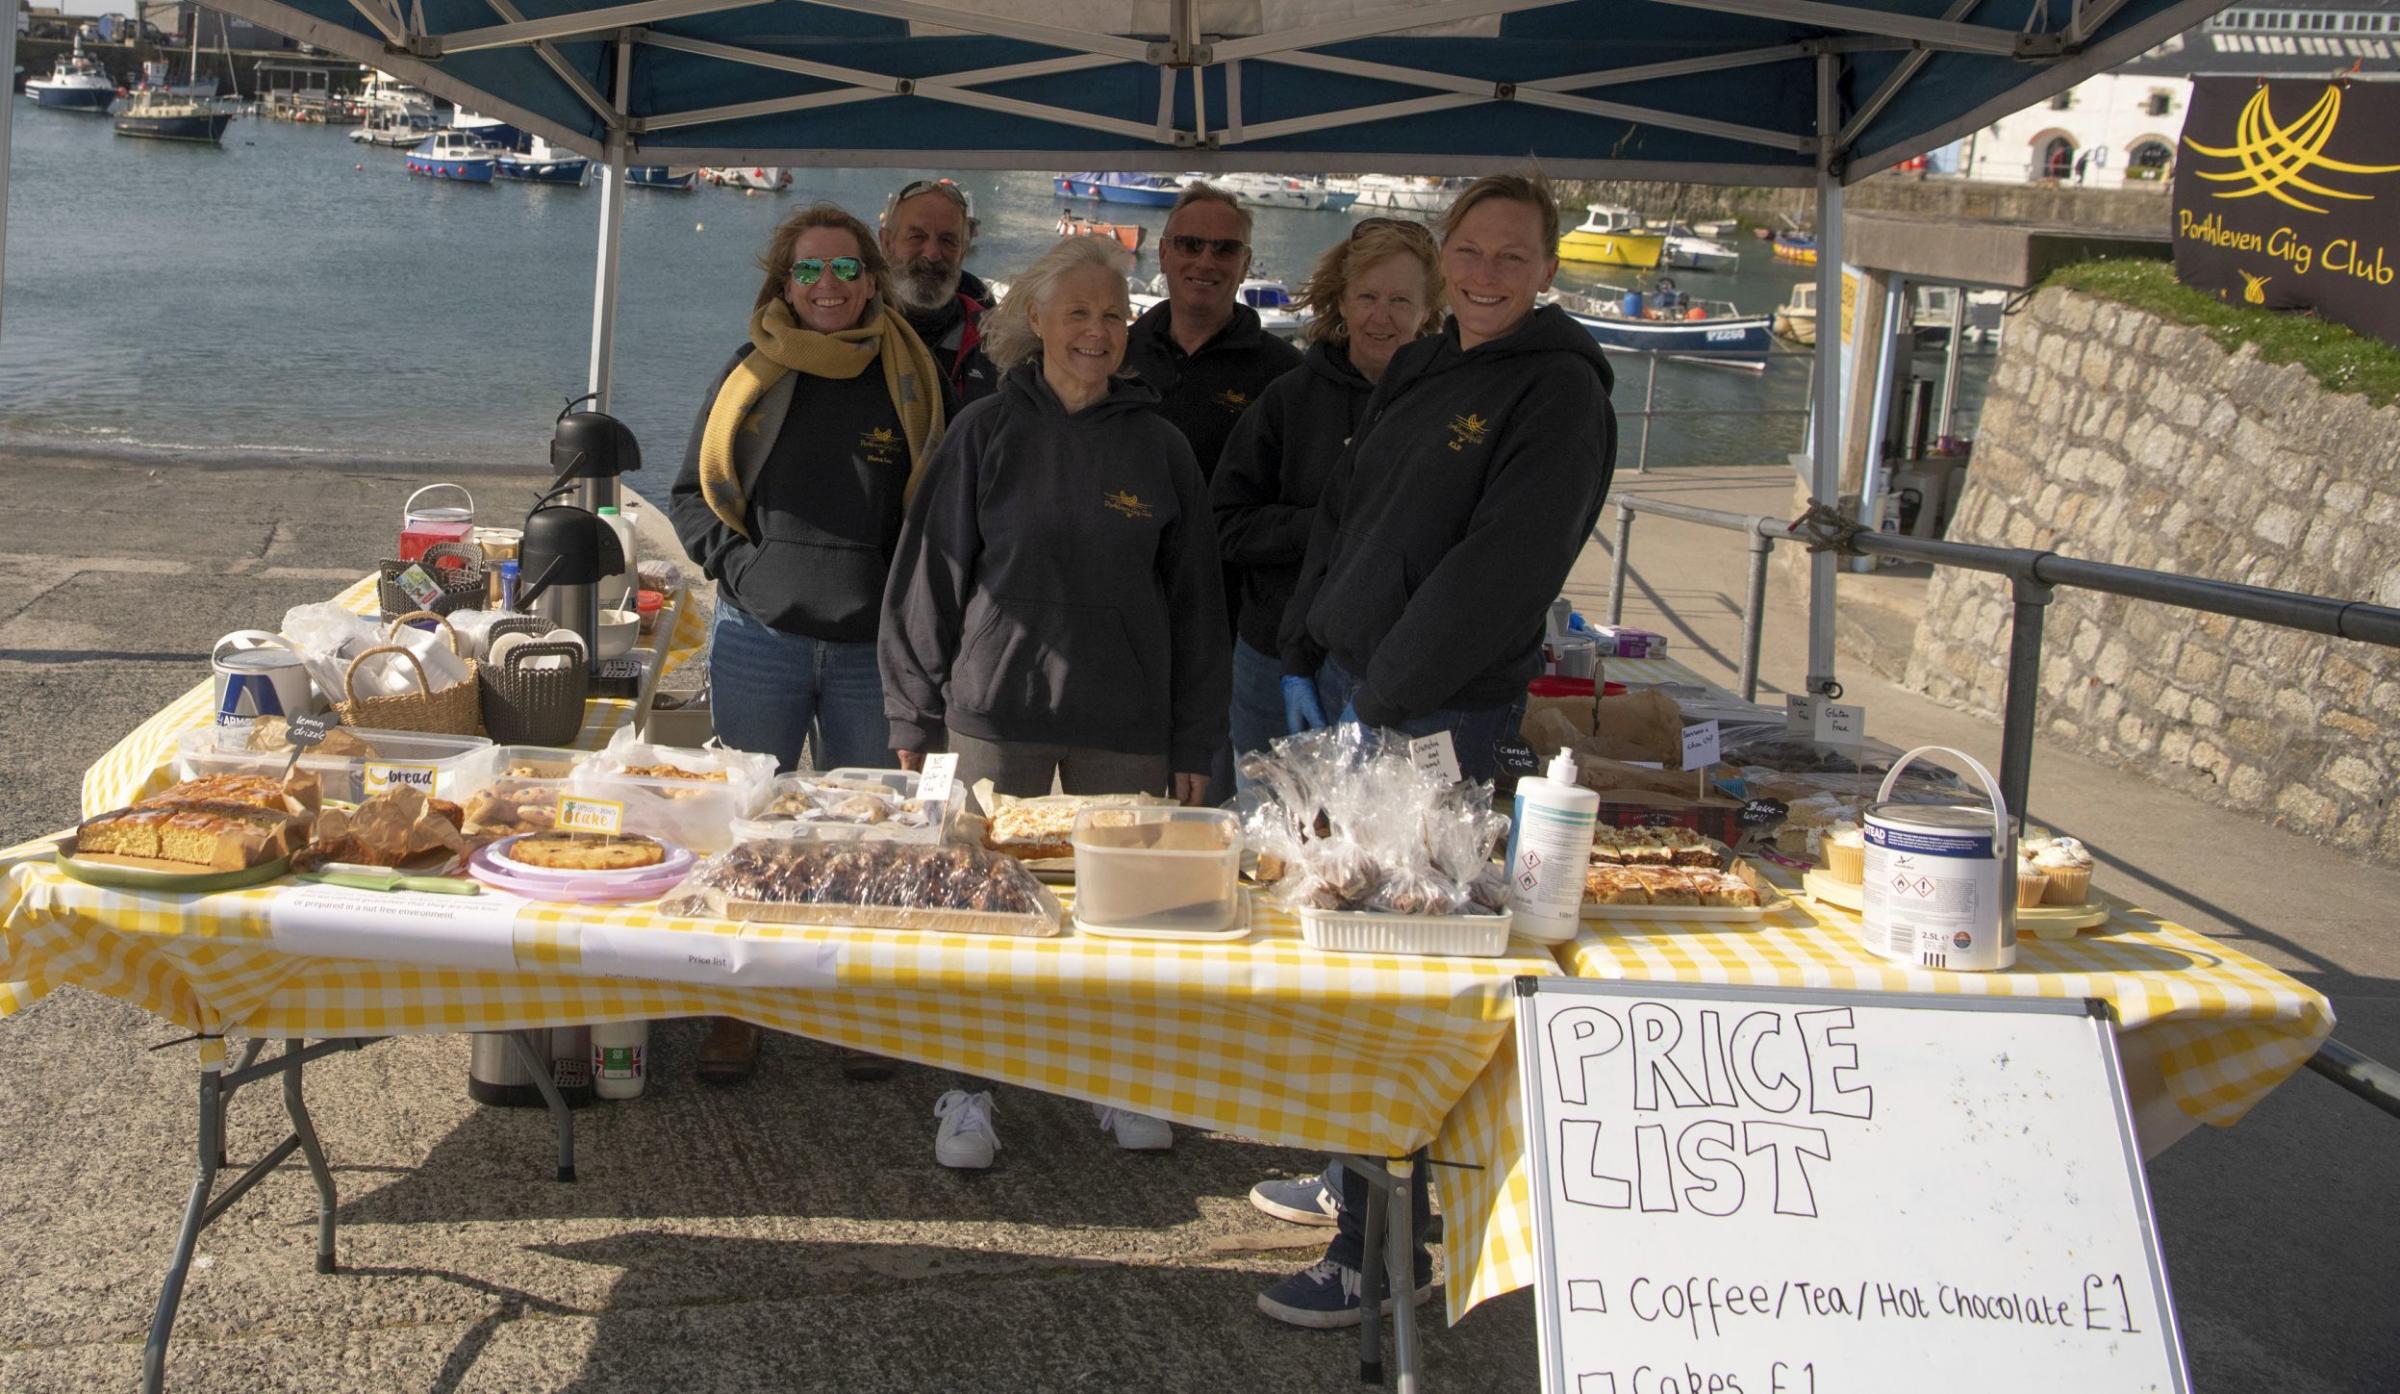 Porthleven Gig club selling homemade cakes